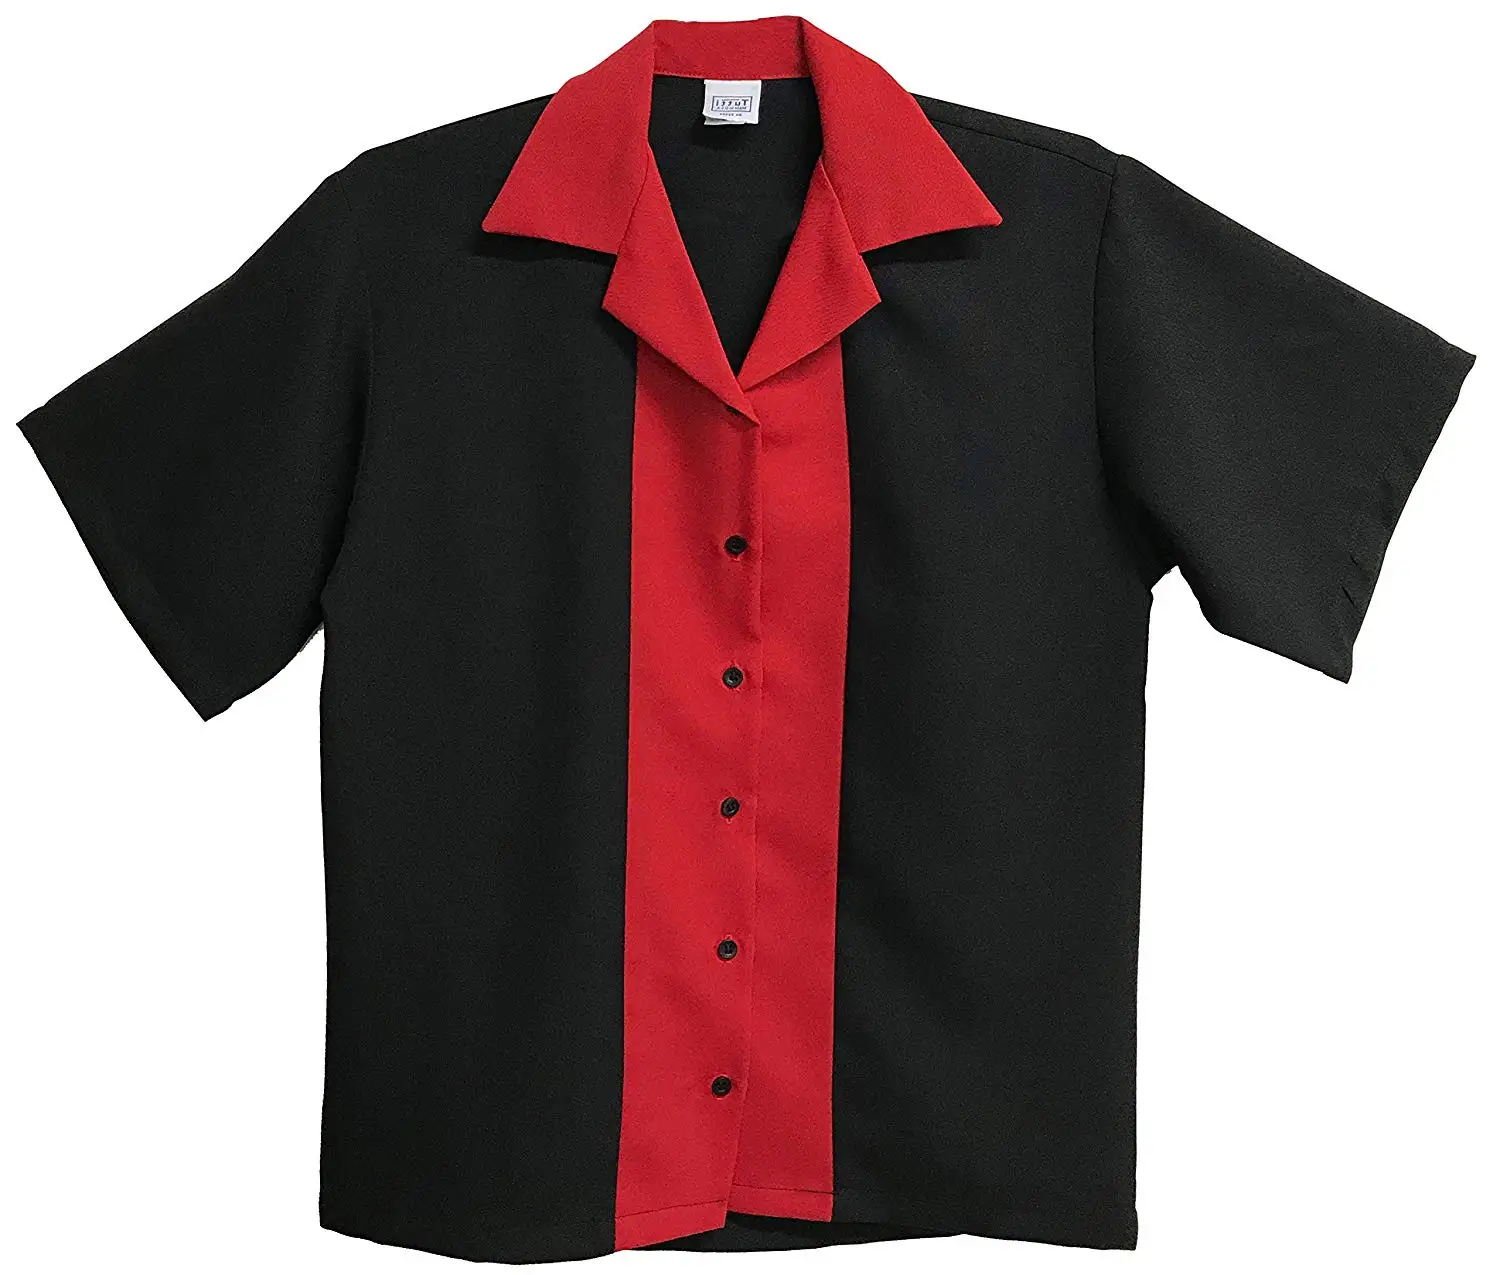 Cheap Red Bowling Shirt, find Red Bowling Shirt deals on line at ...